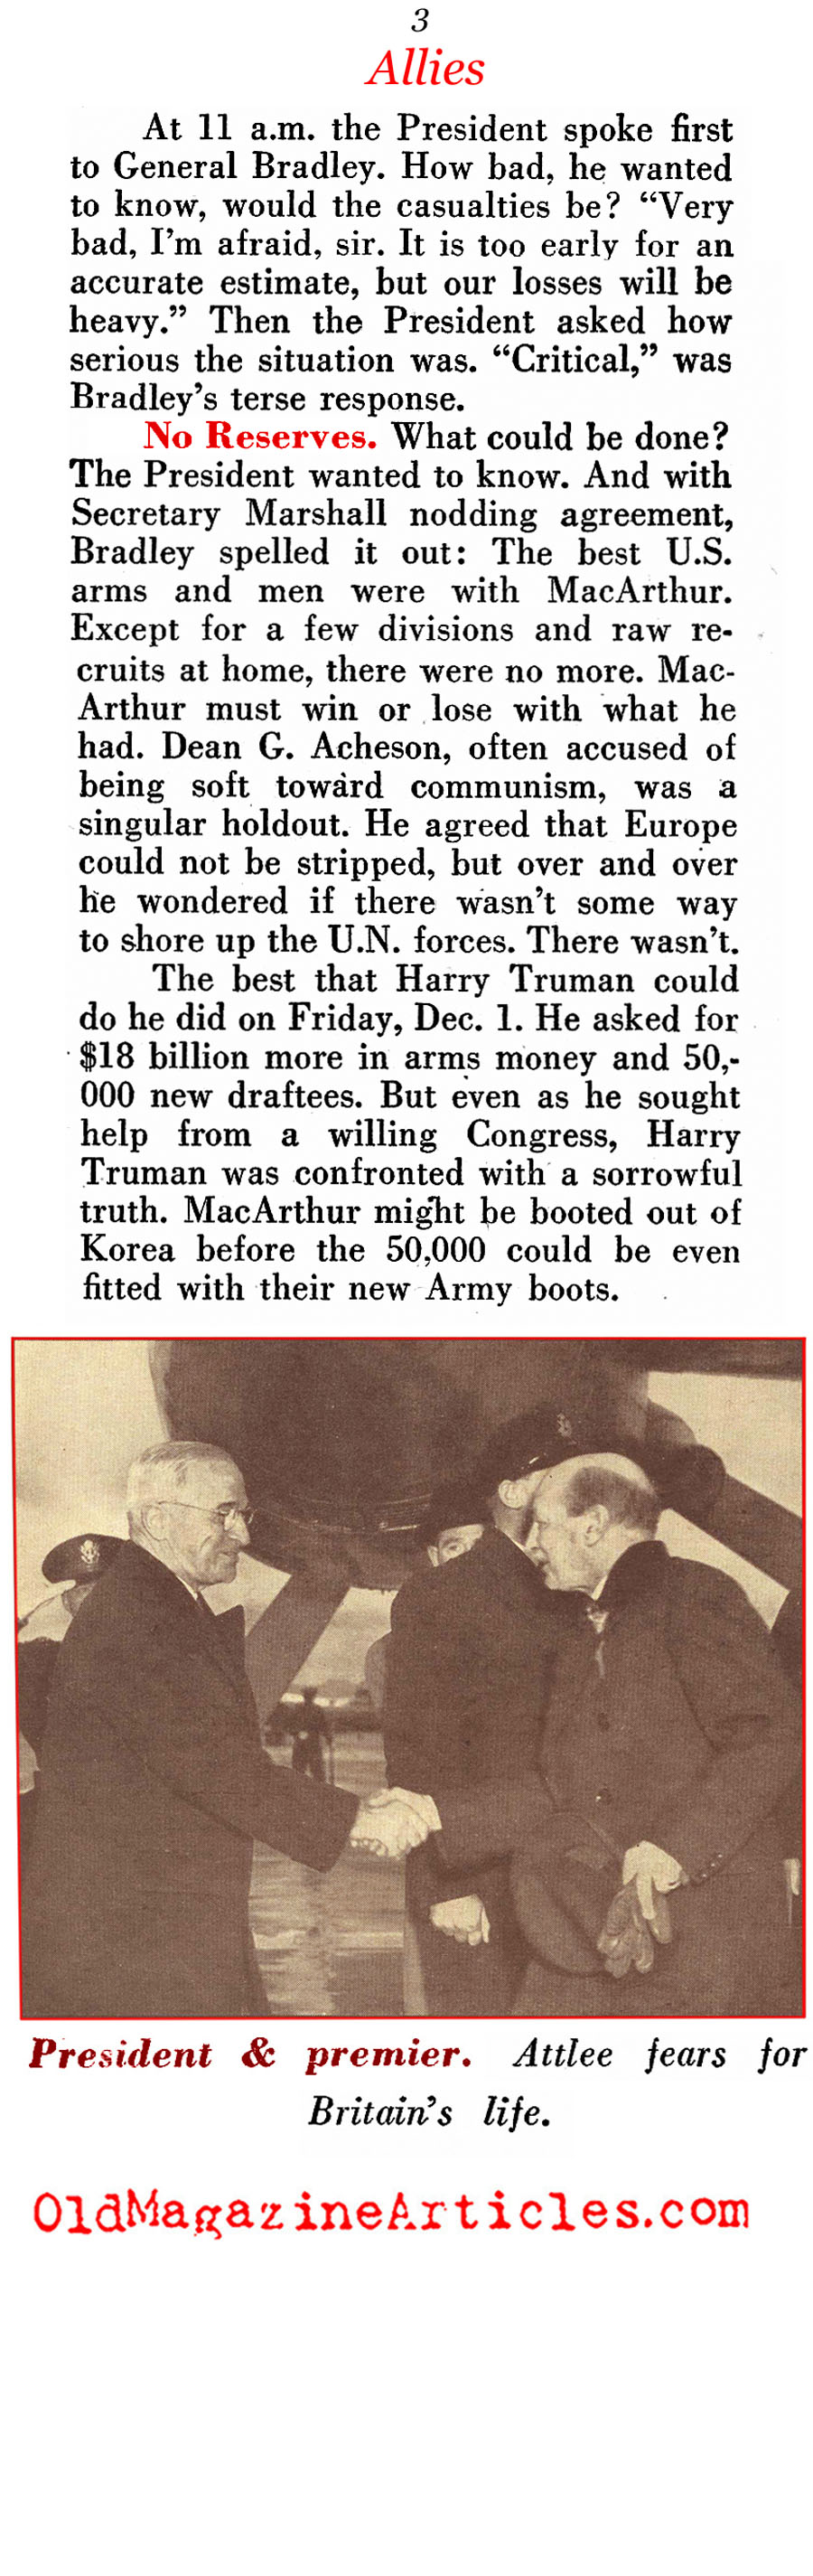 The Critical Situation in Korea  (Pathfinder Magazine, 1950)